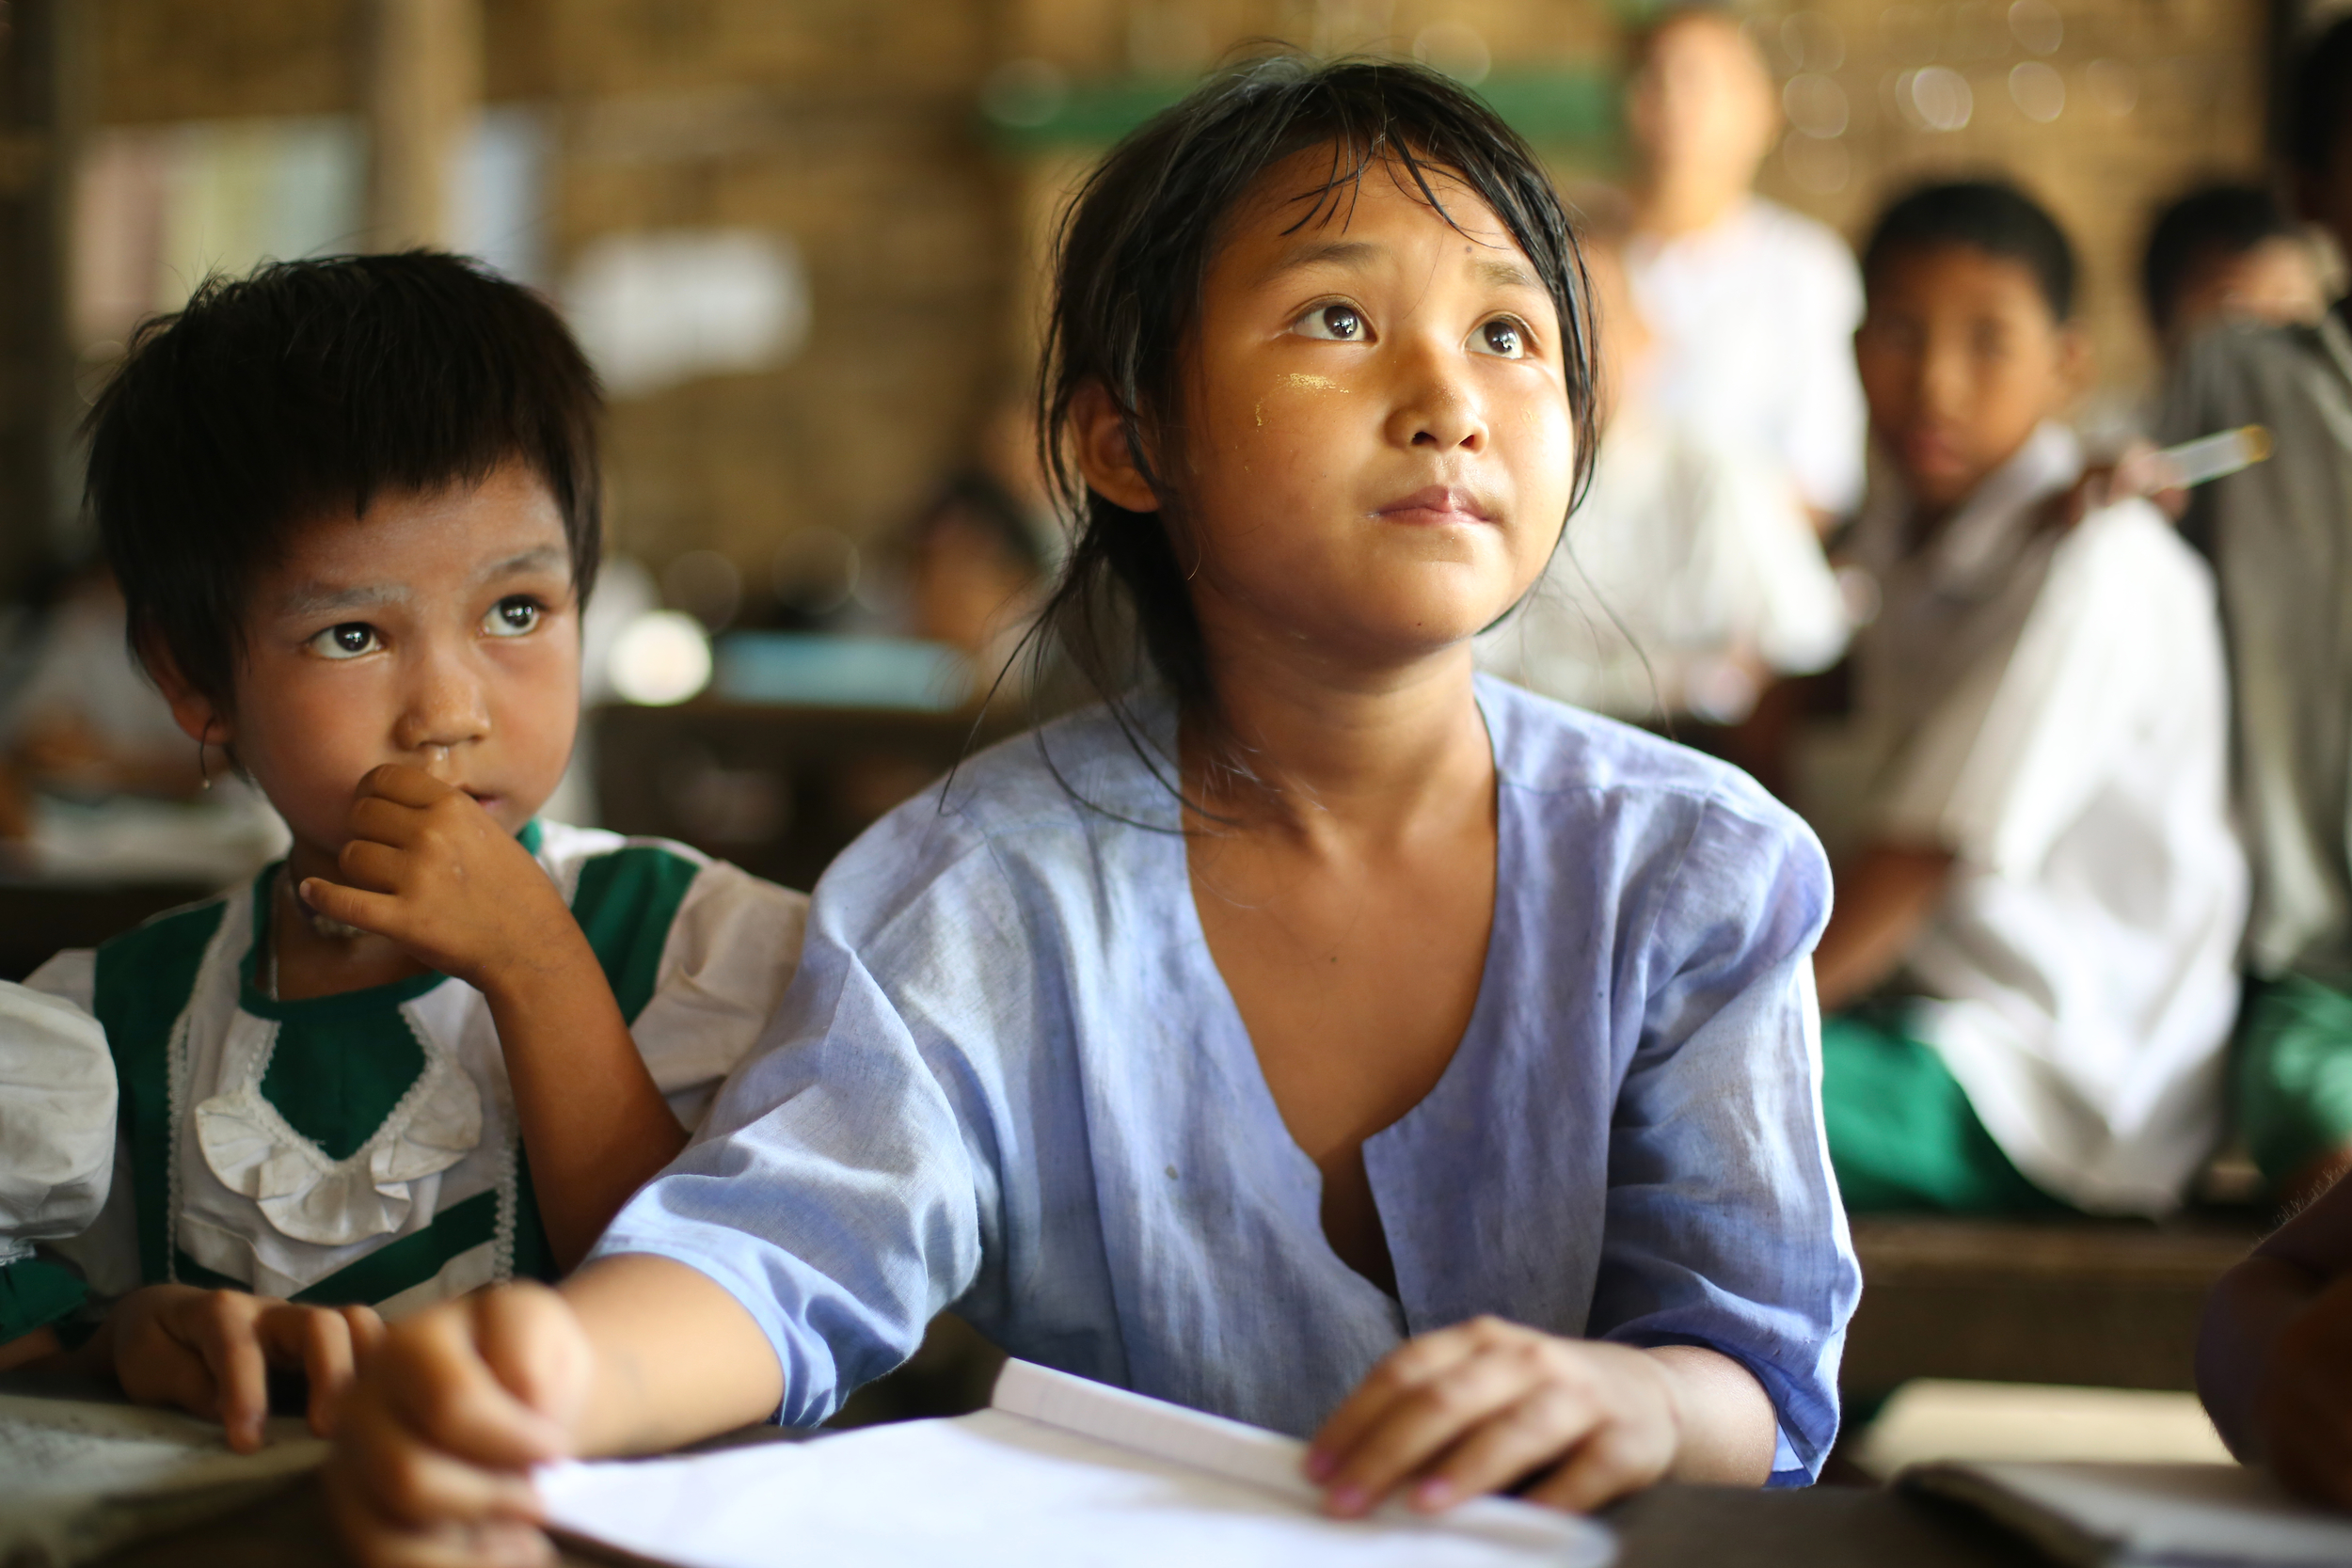 Access to education is still a struggle for thousands of girls in Myanmar